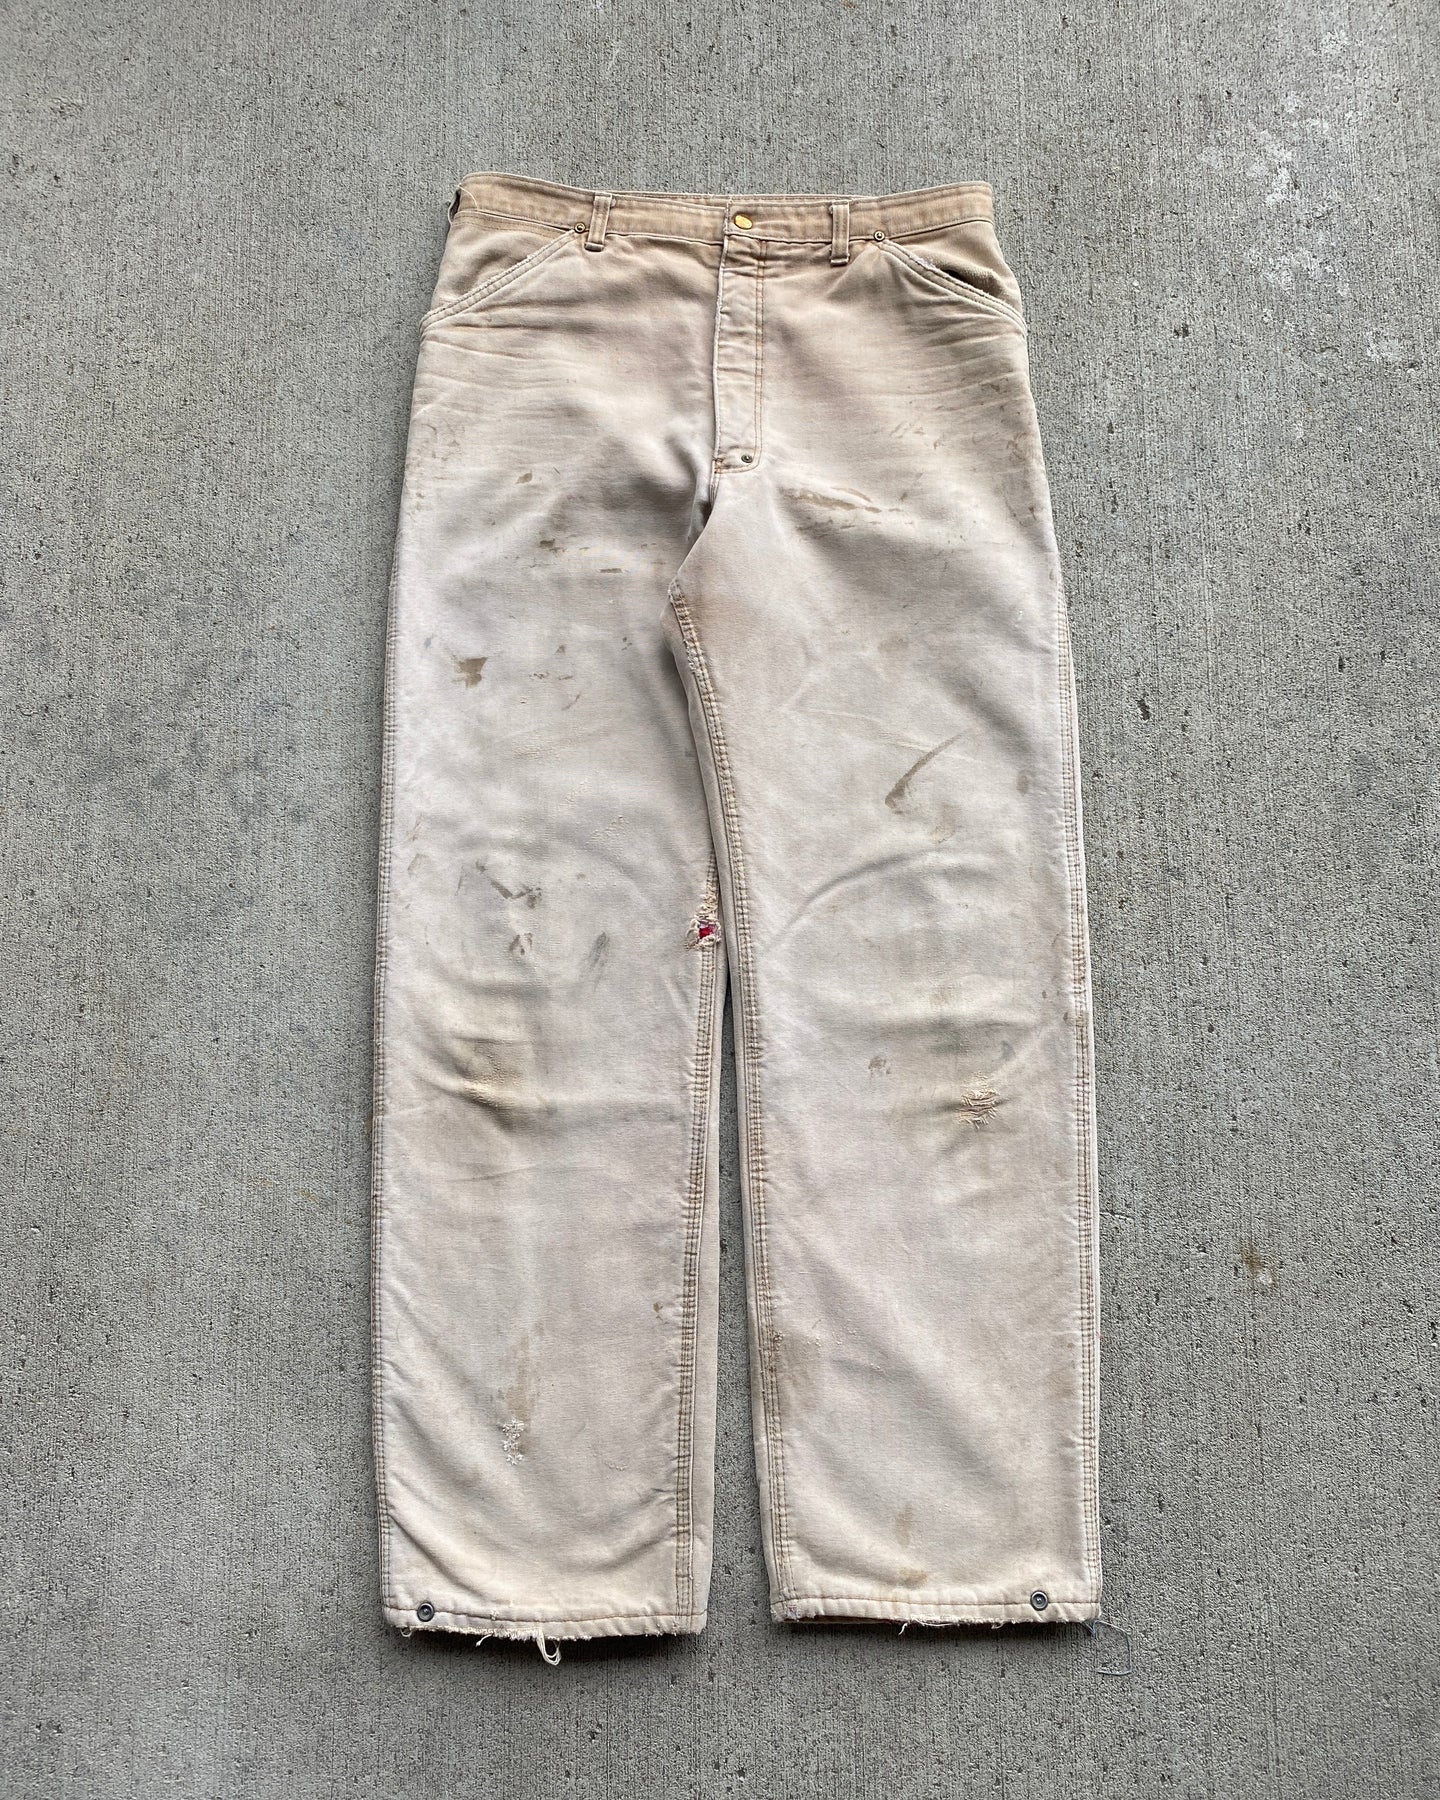 1970s Carhartt Quilted Distressed Work Pants - Size 34 x 32